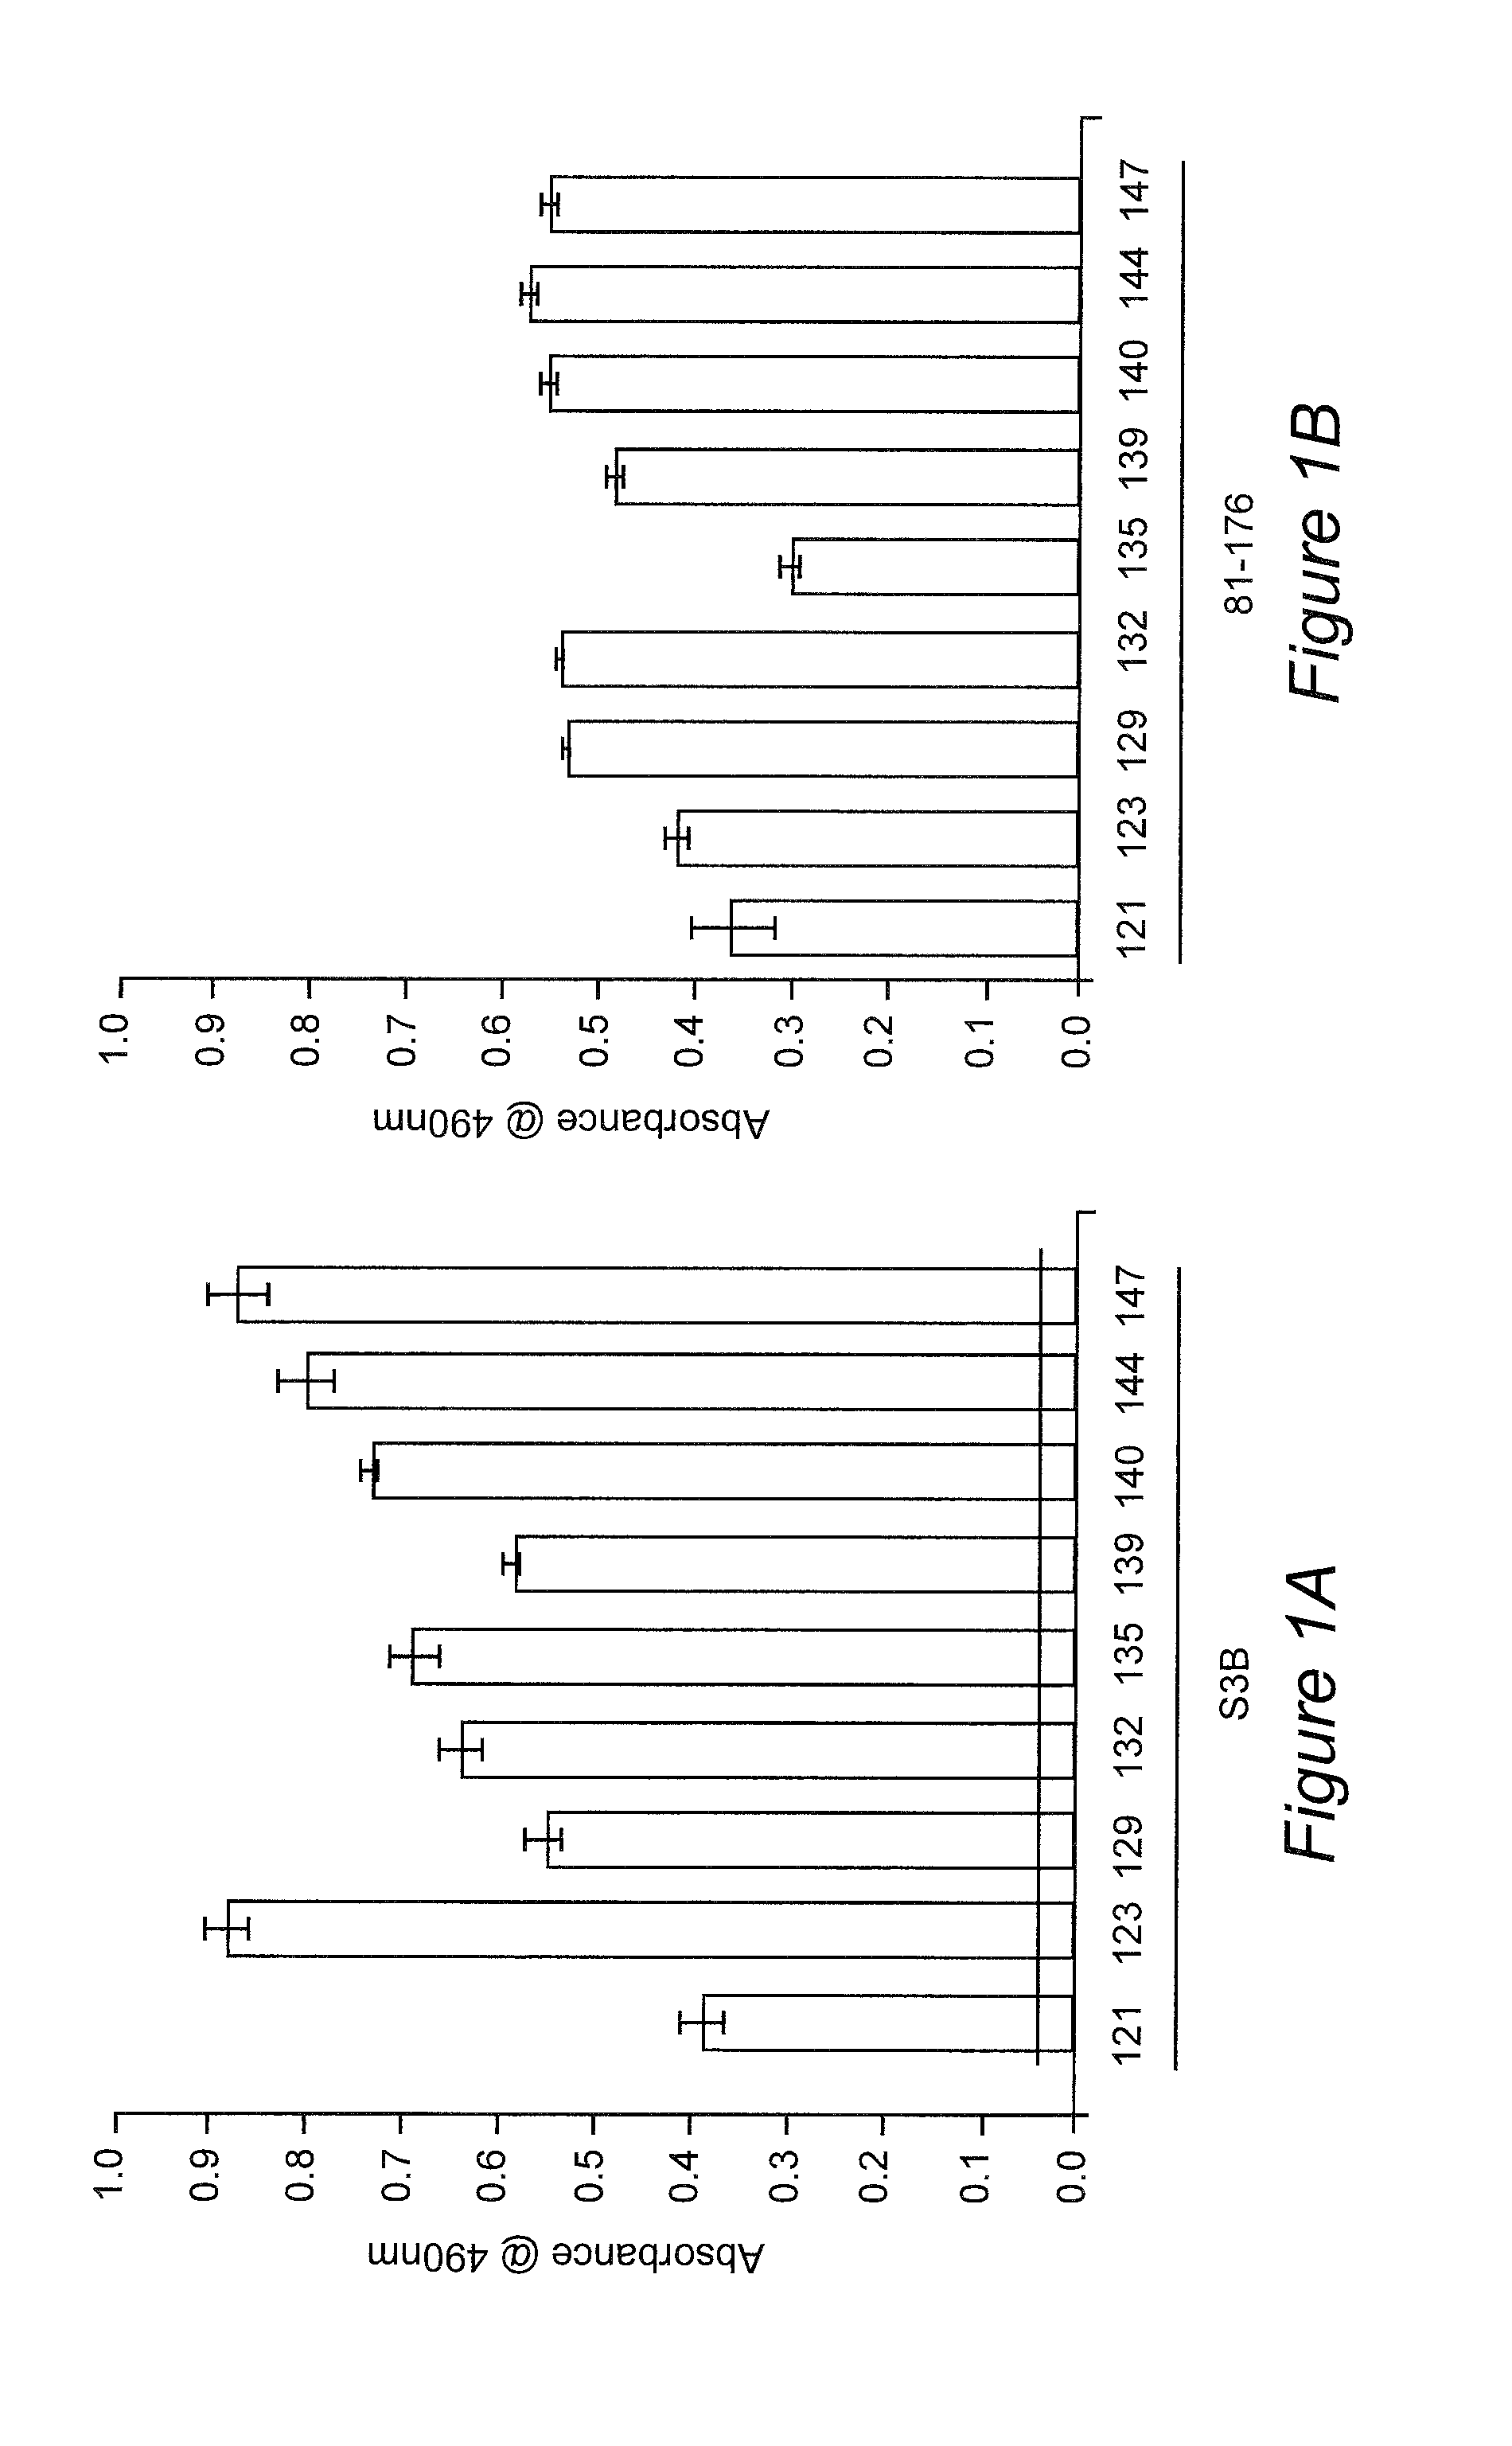 Antigen compositions and methods of inhibiting campylobacter jejuni bacterial infection and uses of the antigen compositions